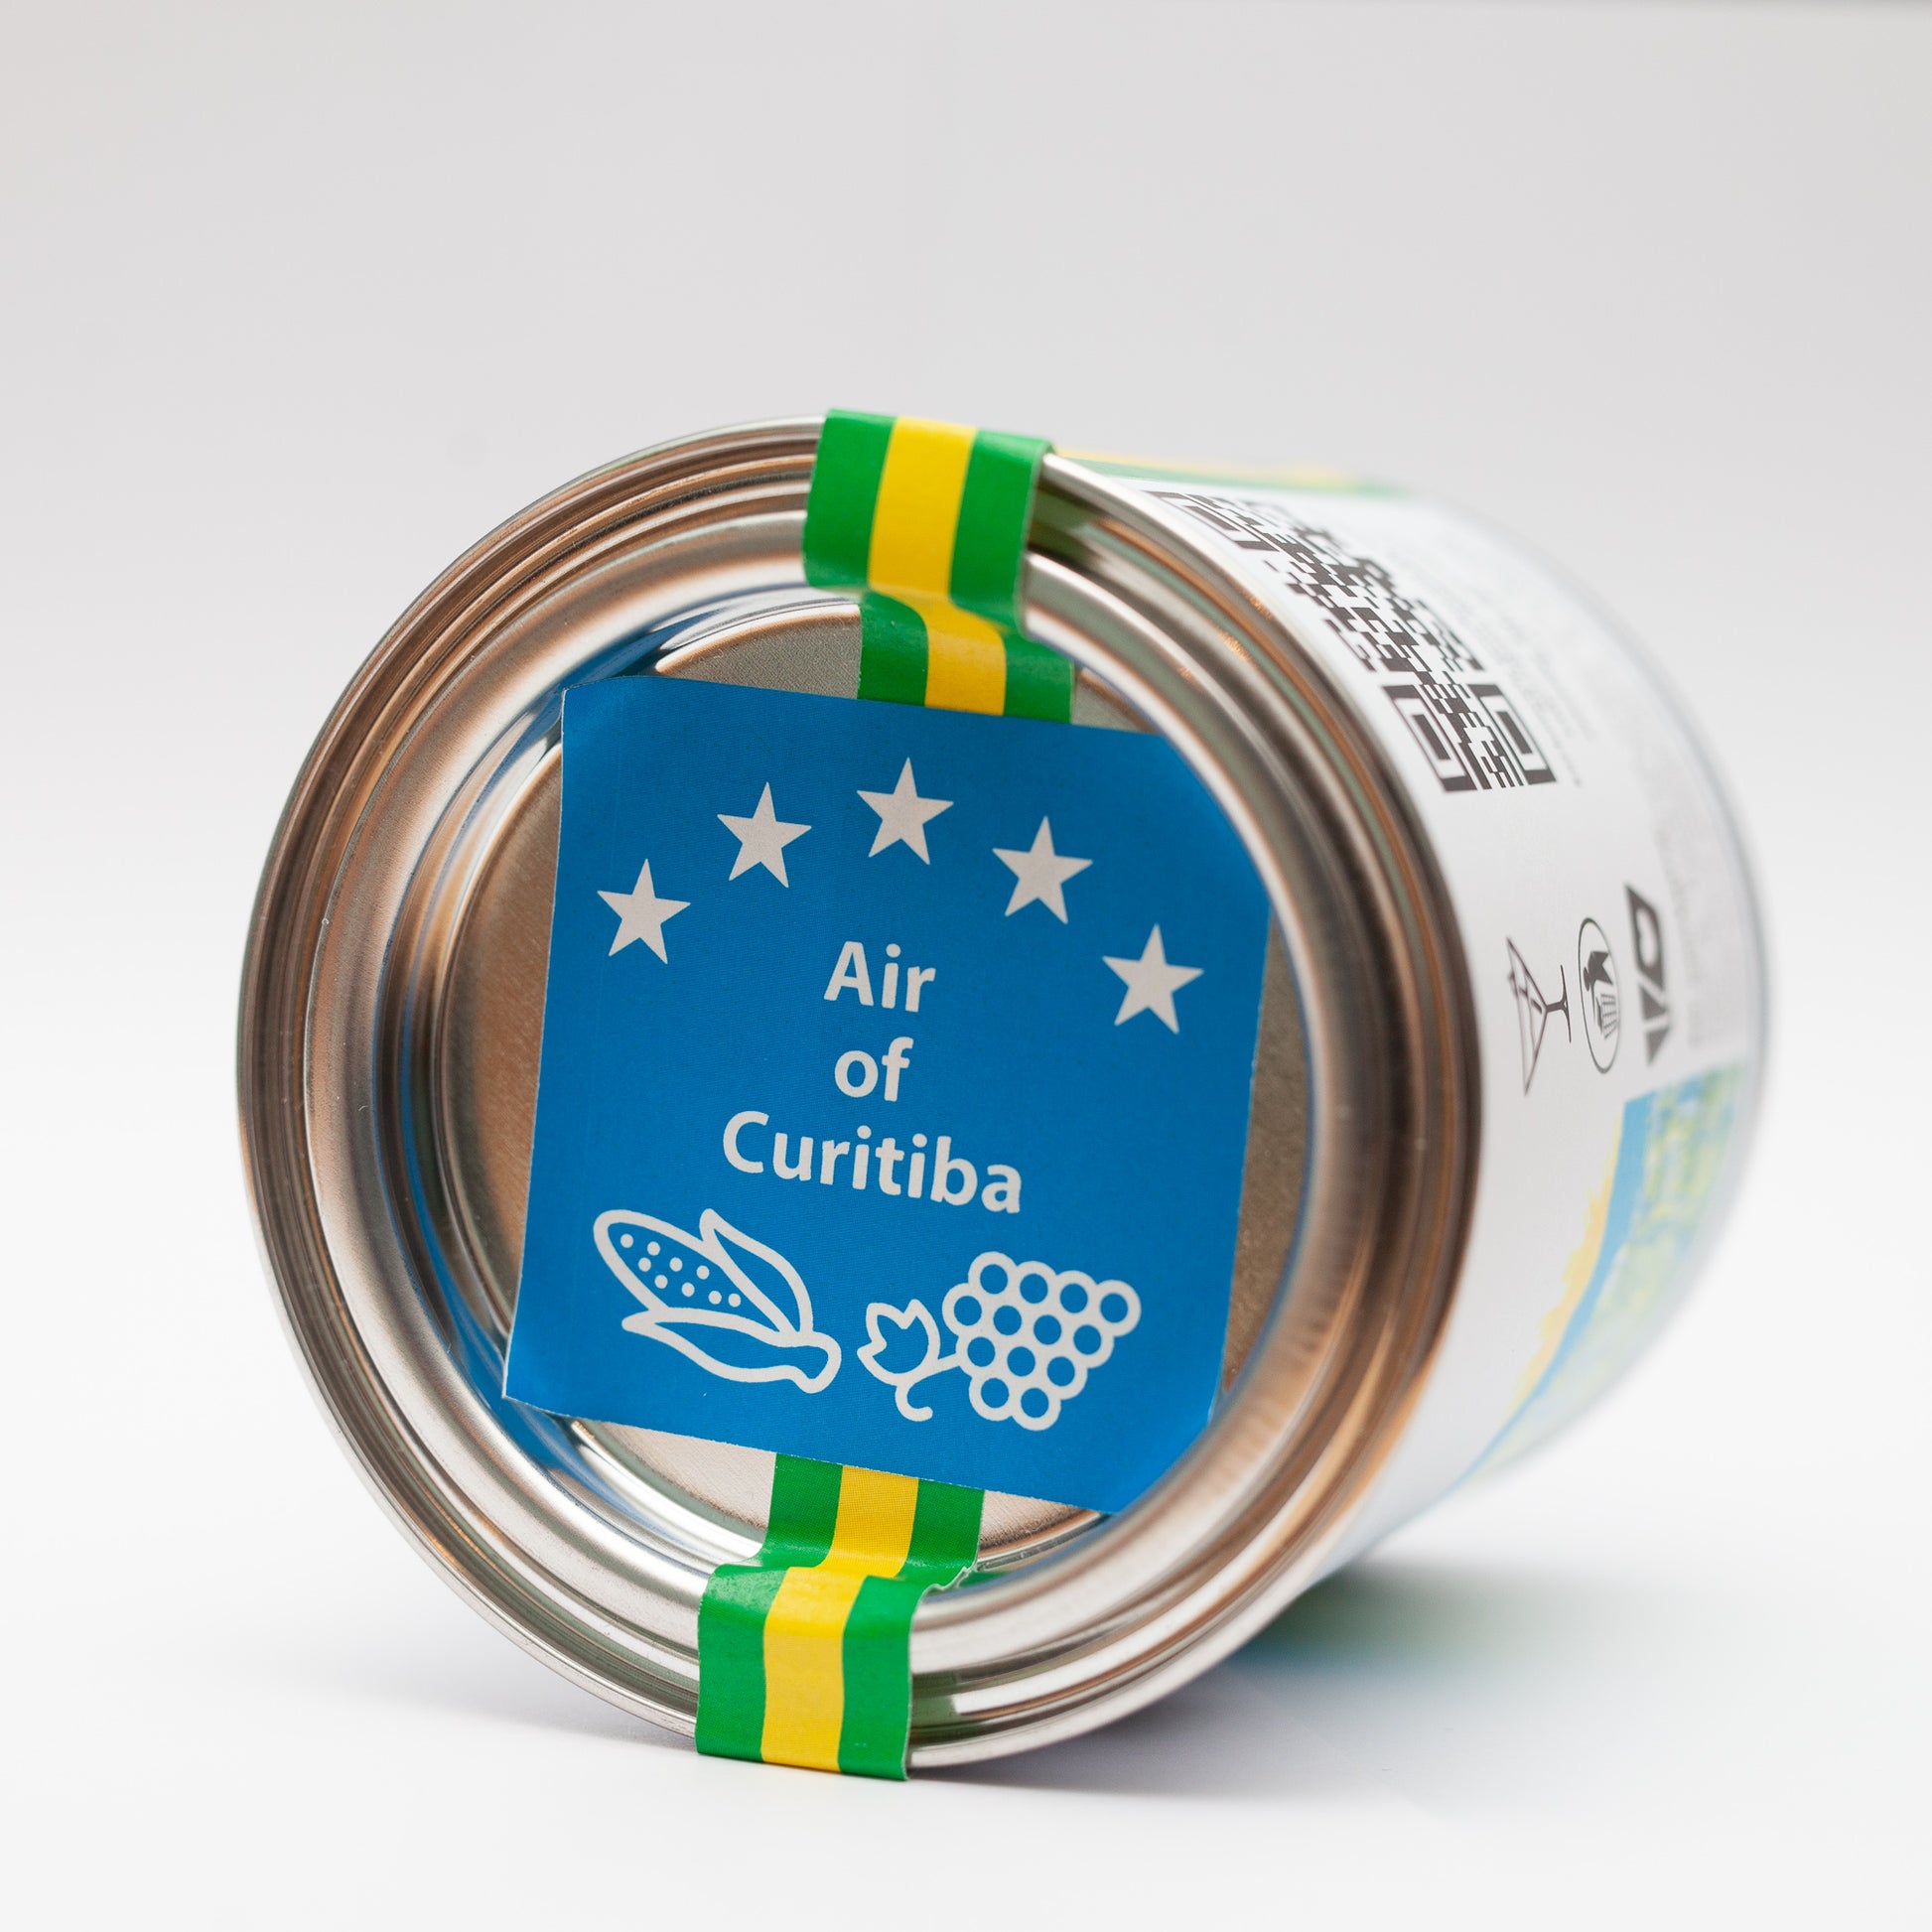 Brazil Gift Ideas - Canned Air from Curitiba